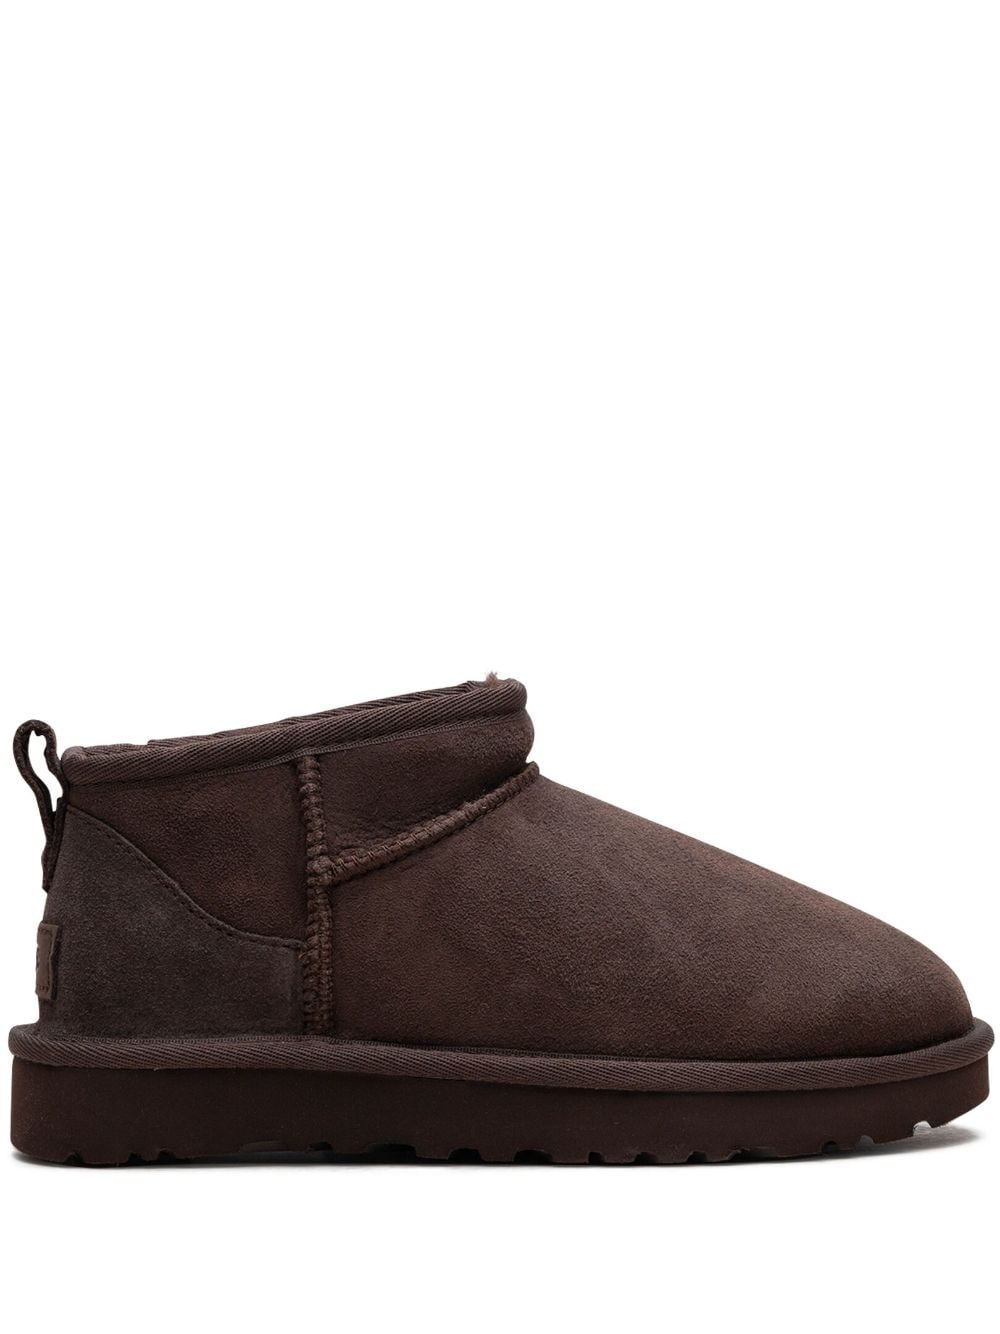 UGG Classic Ultra Mini suede boots Brown